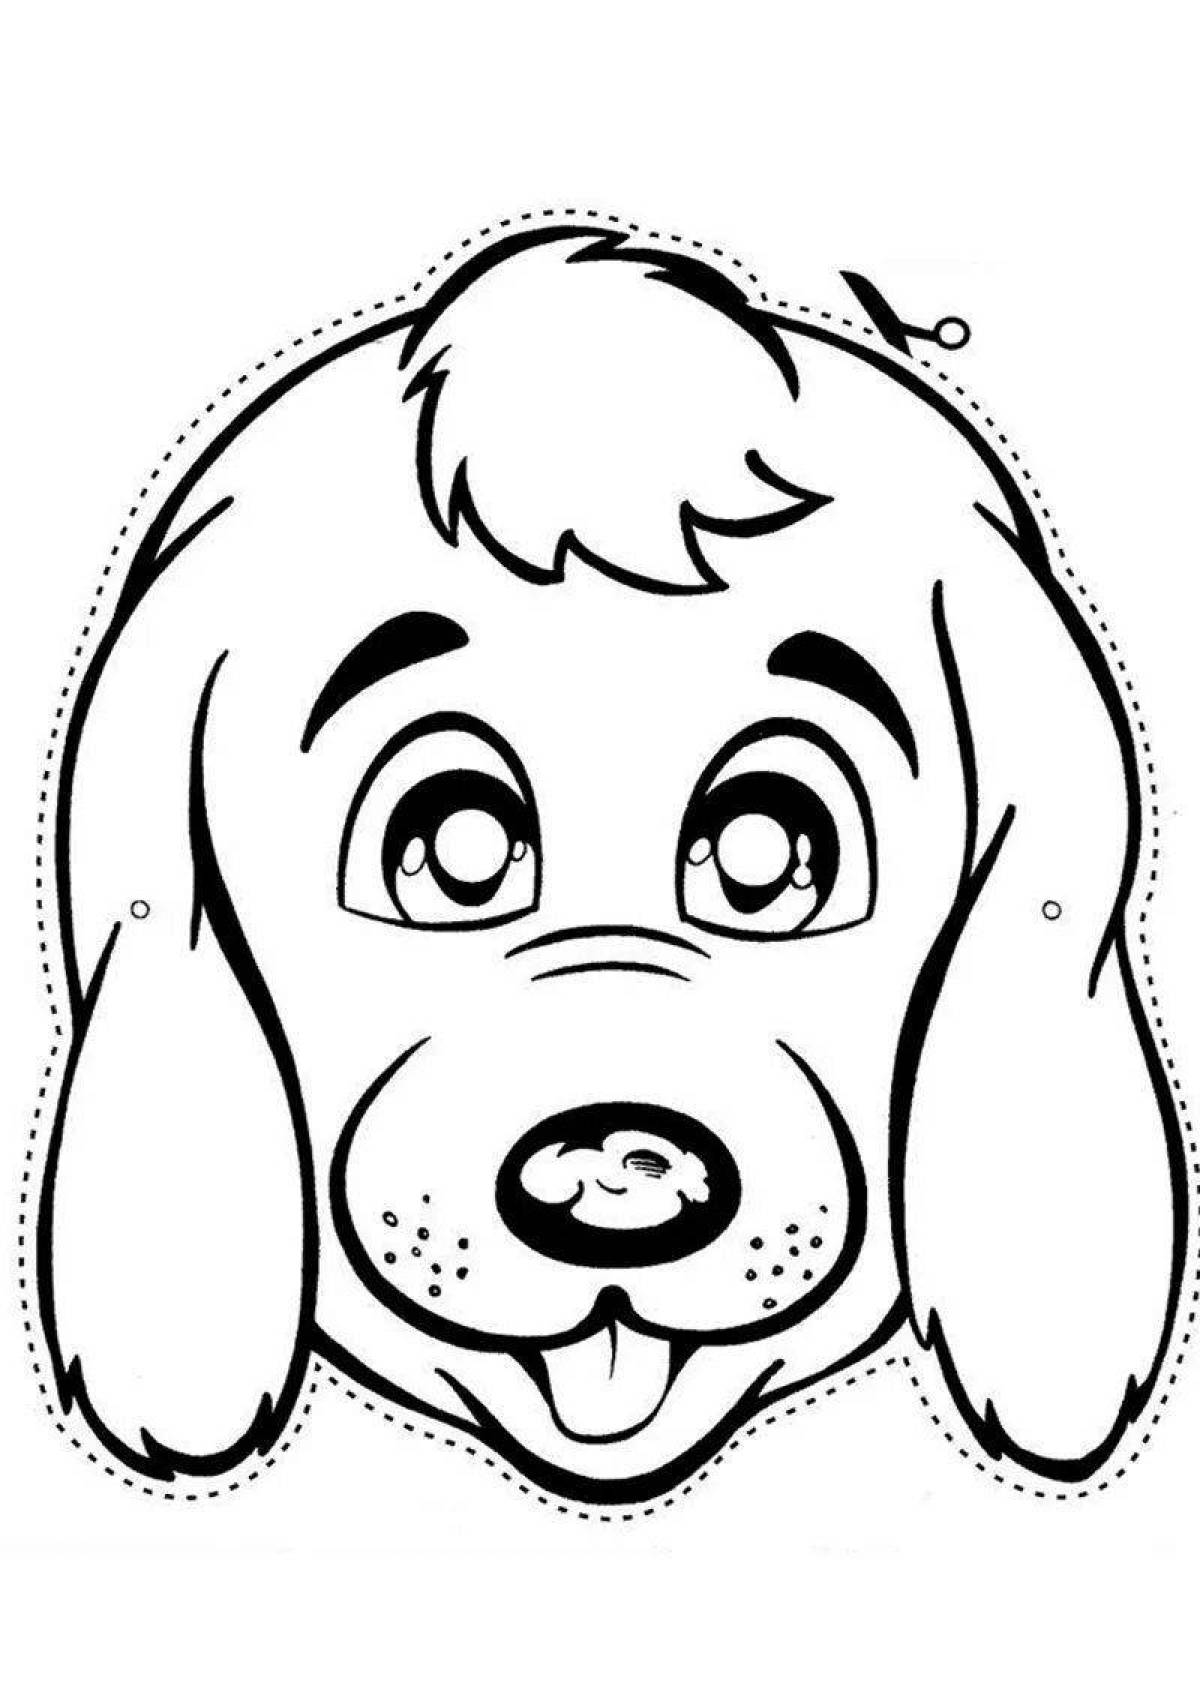 Cute dog head coloring page